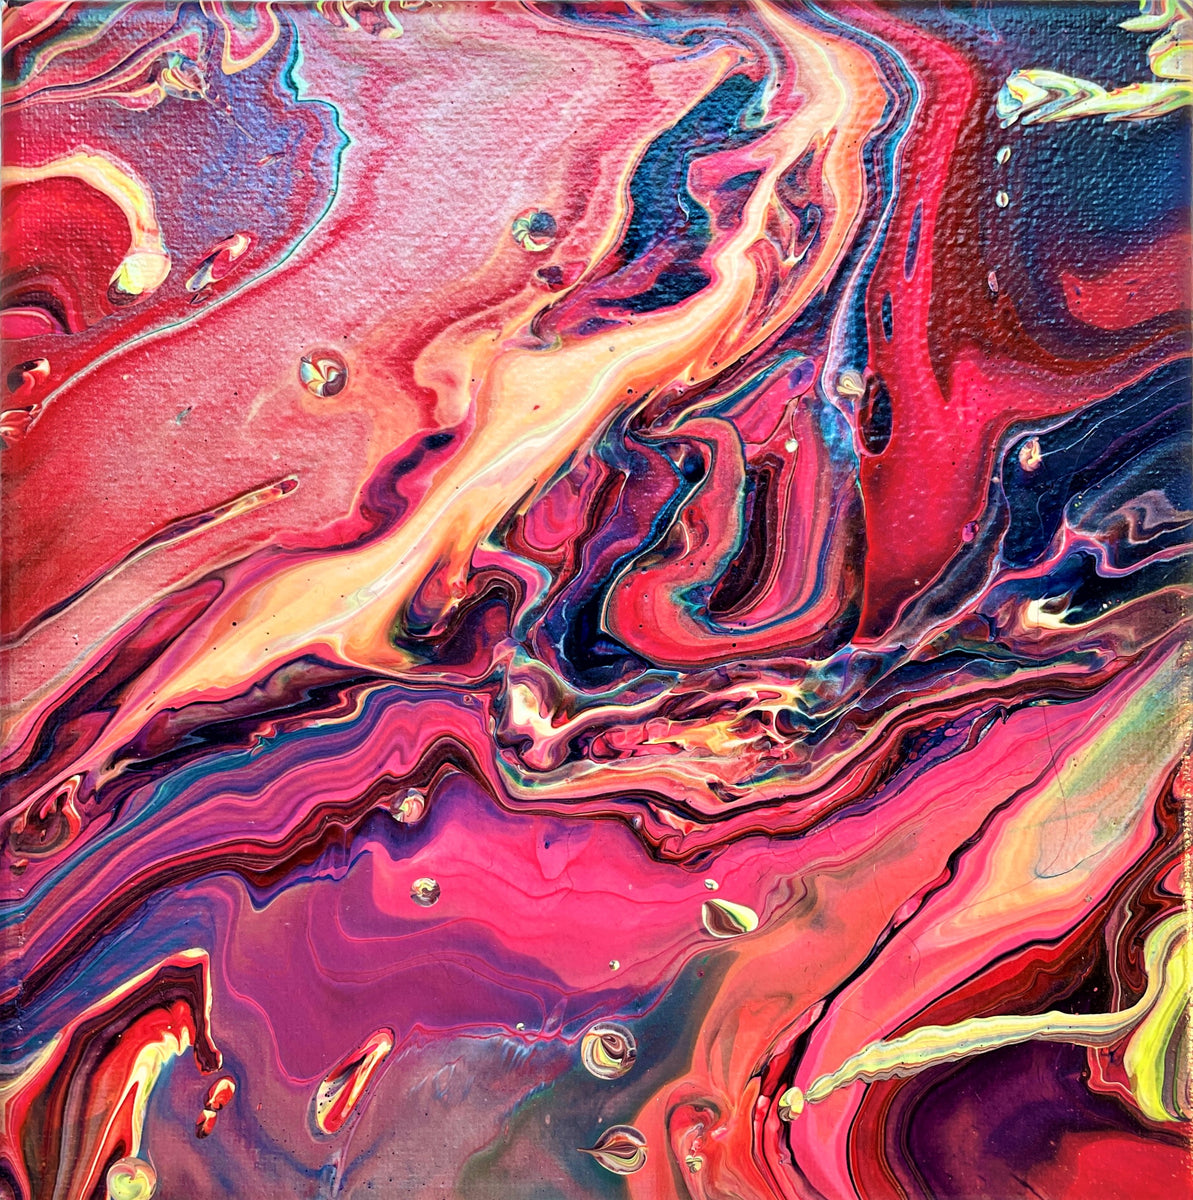 Acrylic Pour Painting - Coral and Green Creation